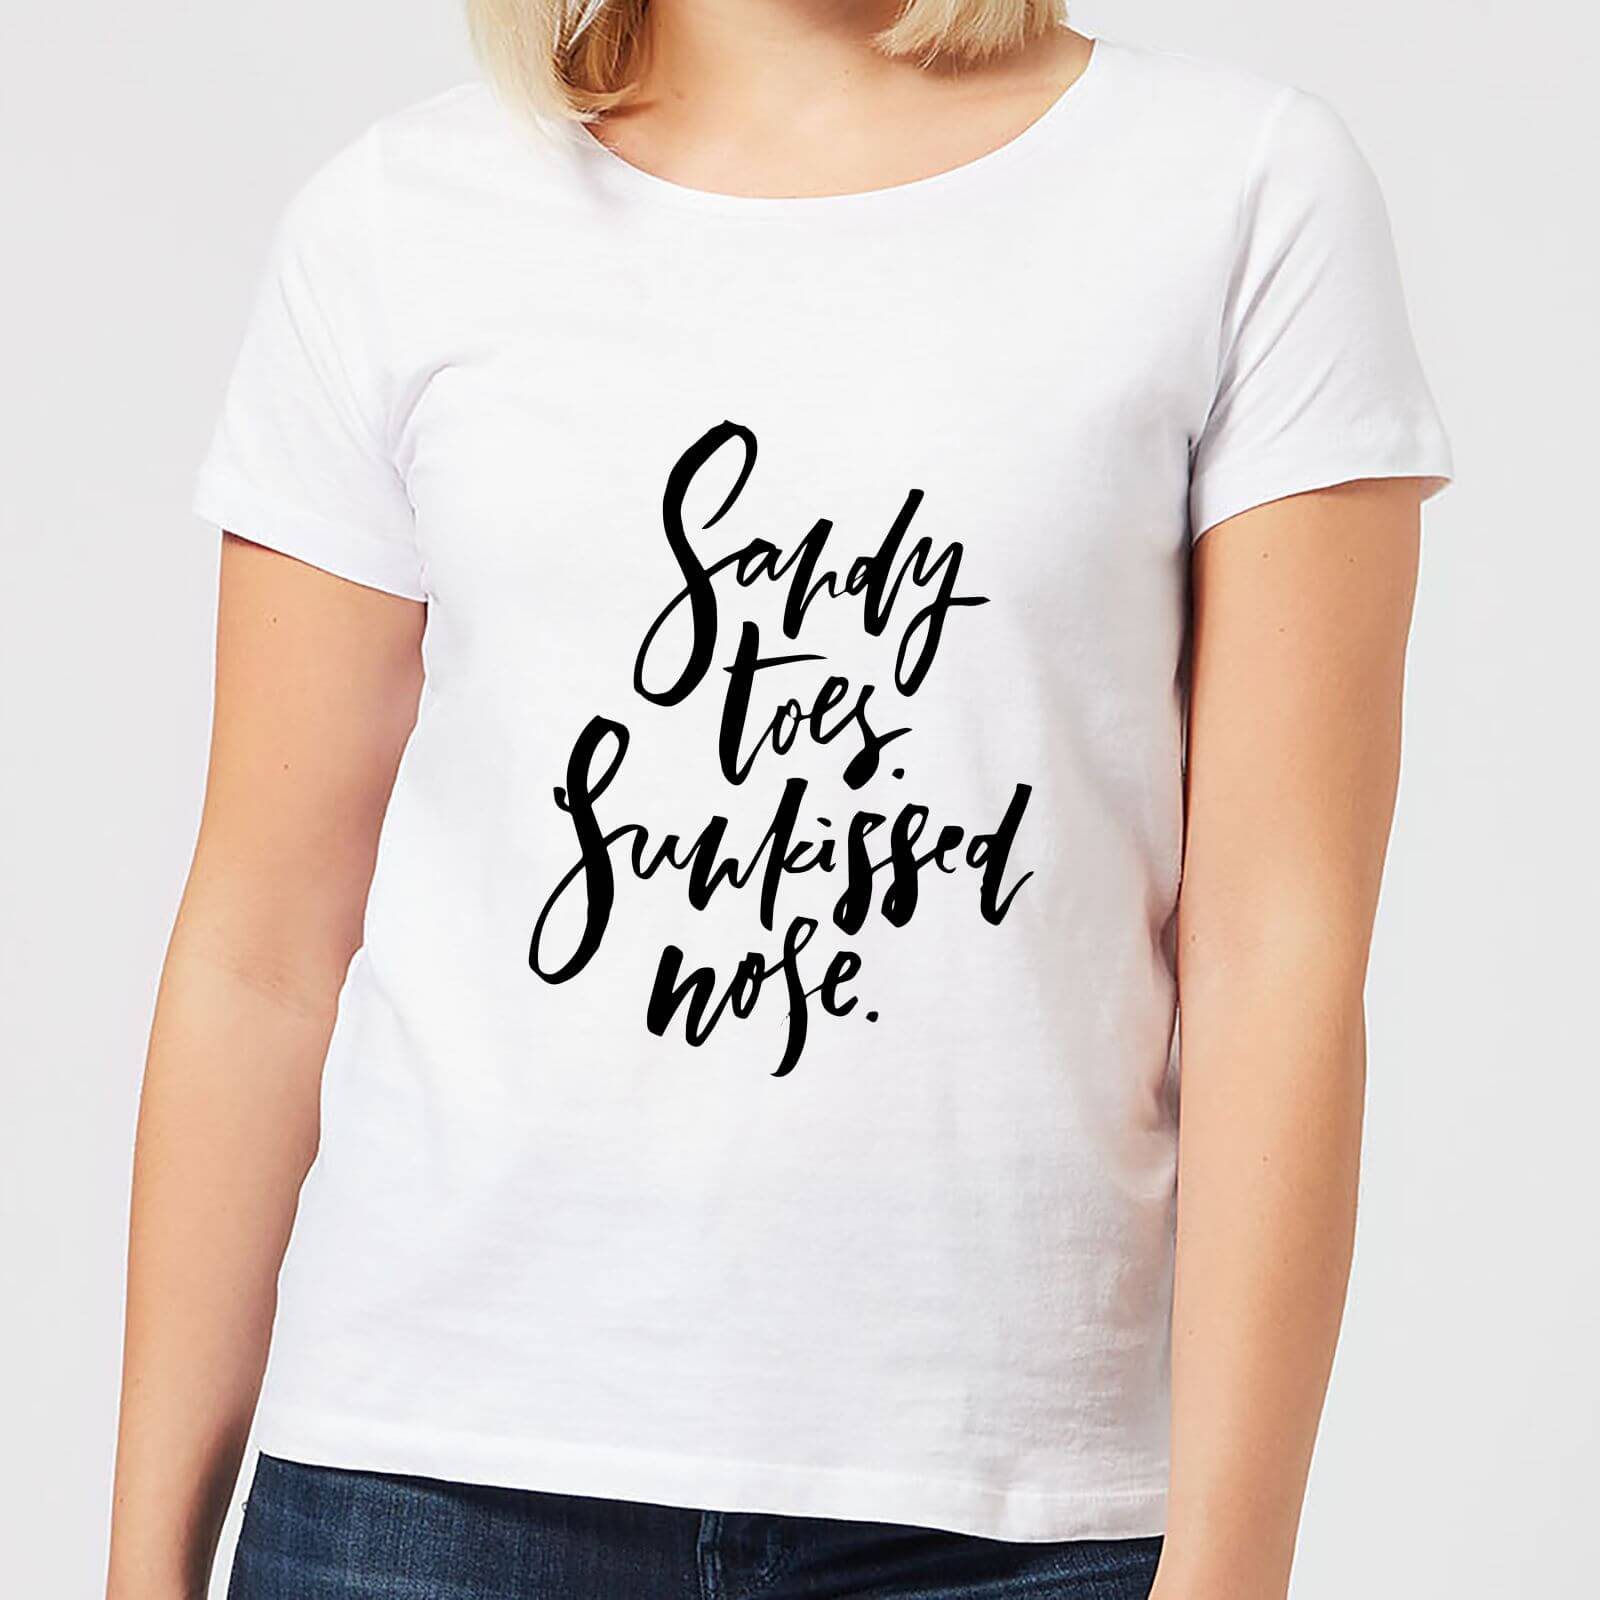 Sandy Toes, Sunkissed Nose Women's T-Shirt - White - S - White